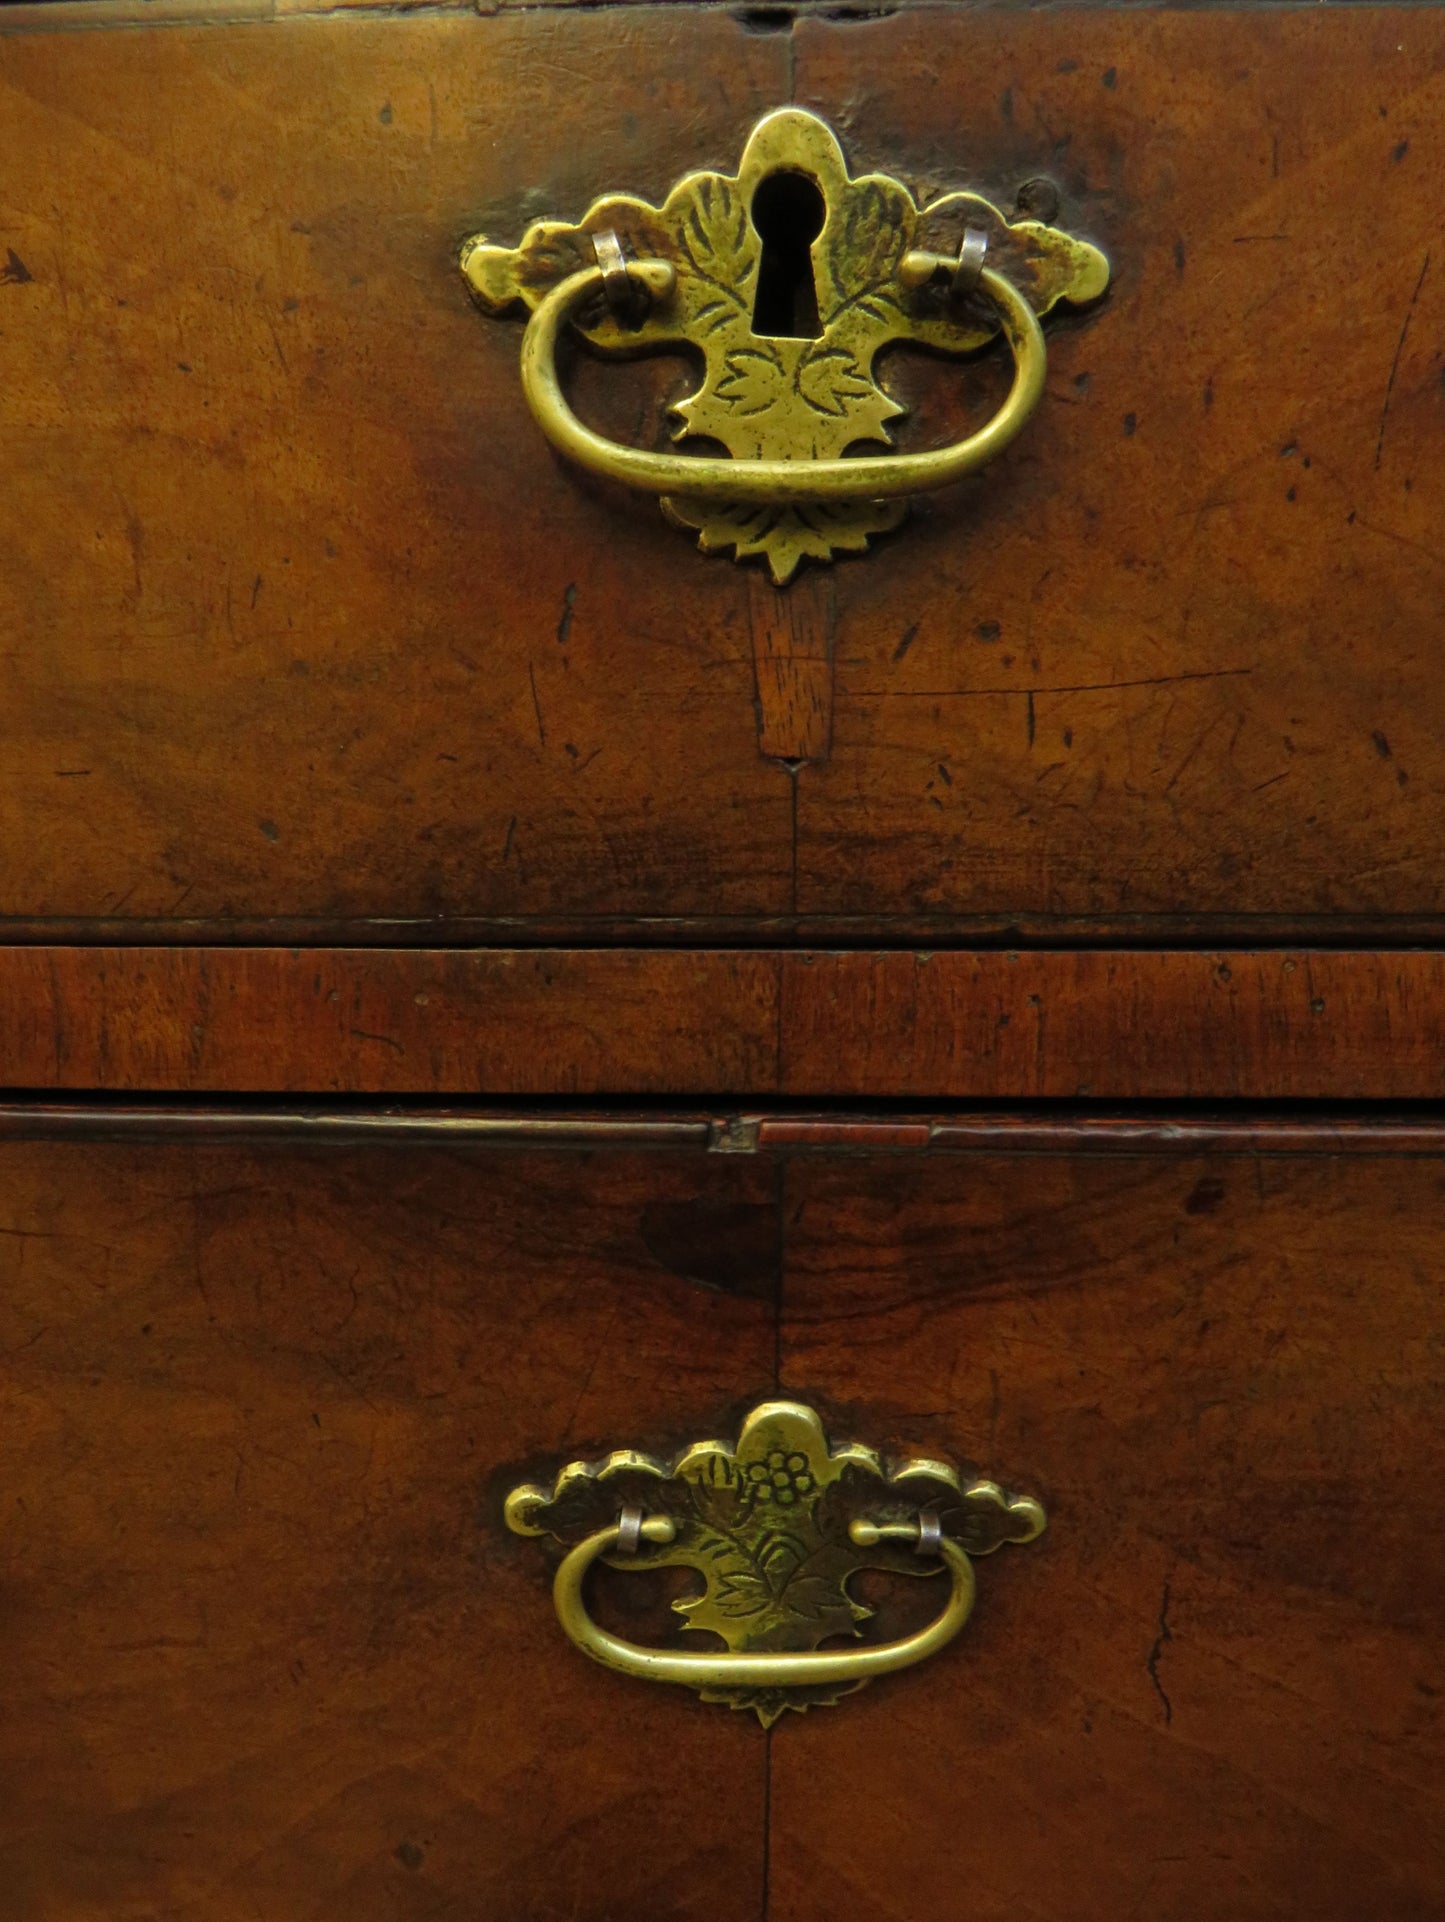 Antique Late Georgian Chest on Stand